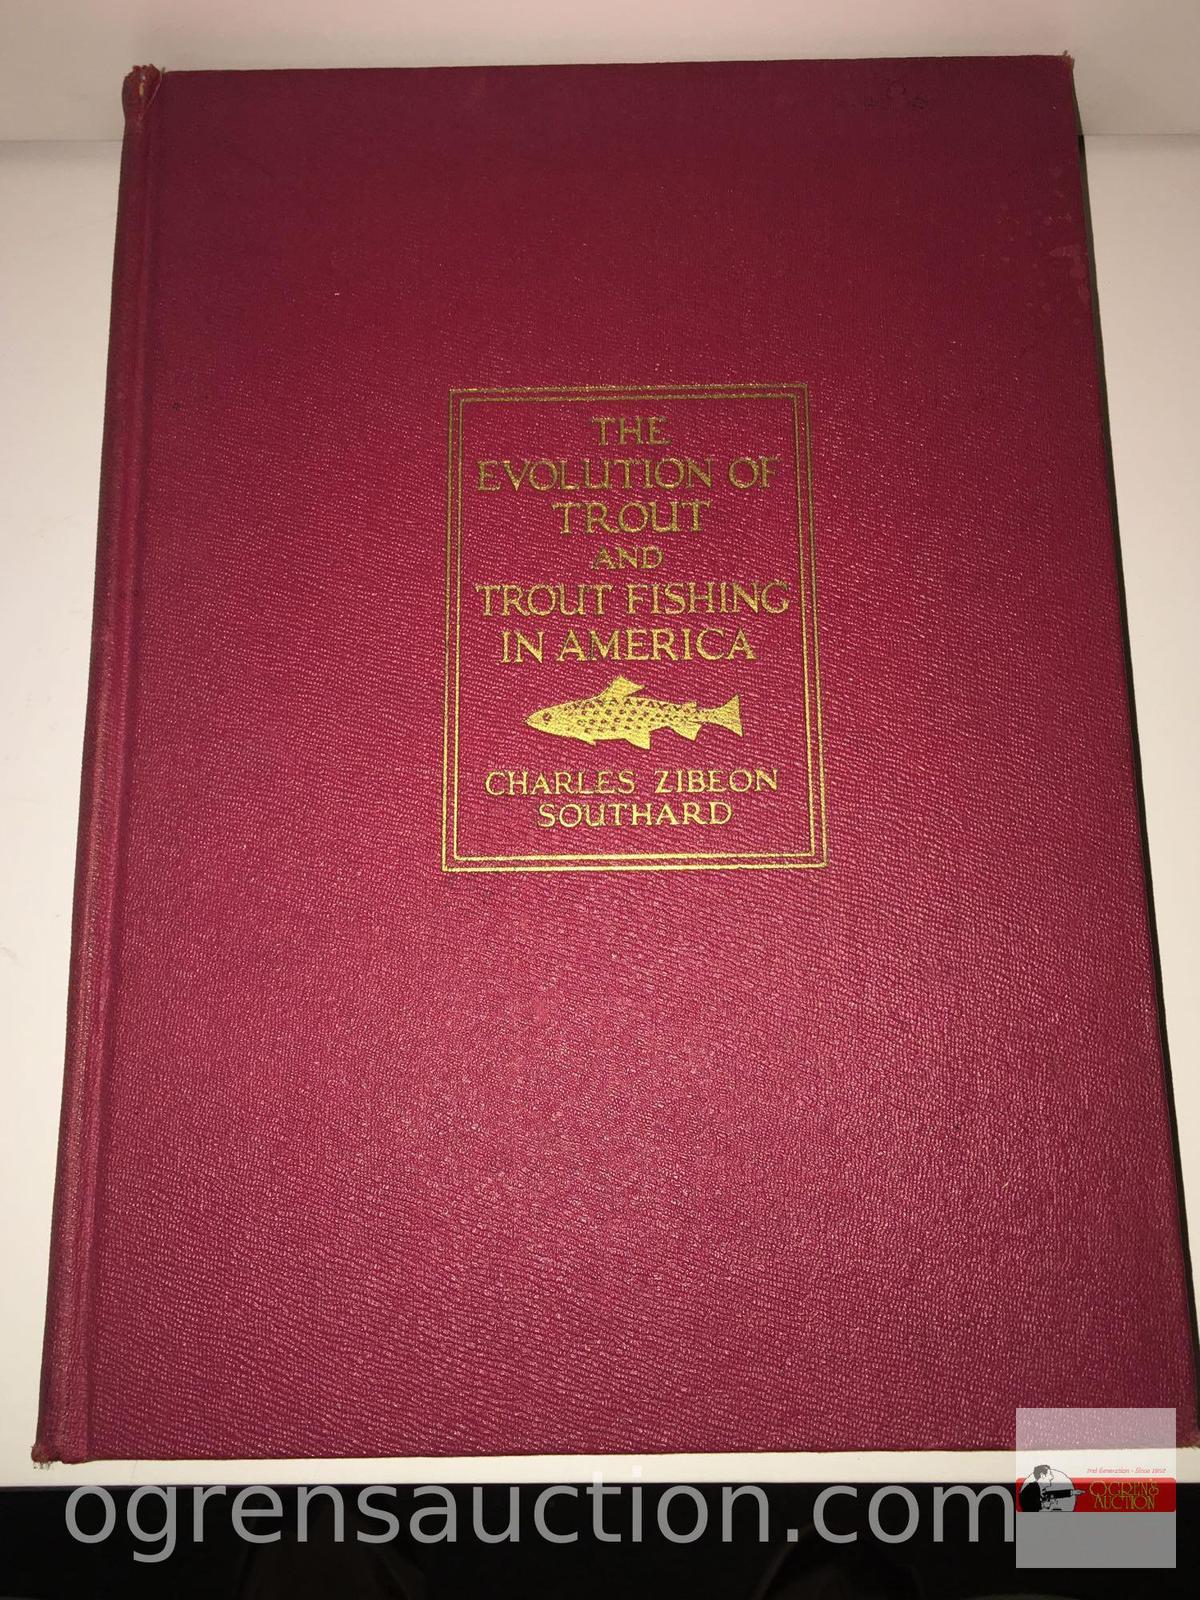 Books - Fishing - 1928 The Evolution of Trout, Trout Fishing in America by Charles Zibeon Southard